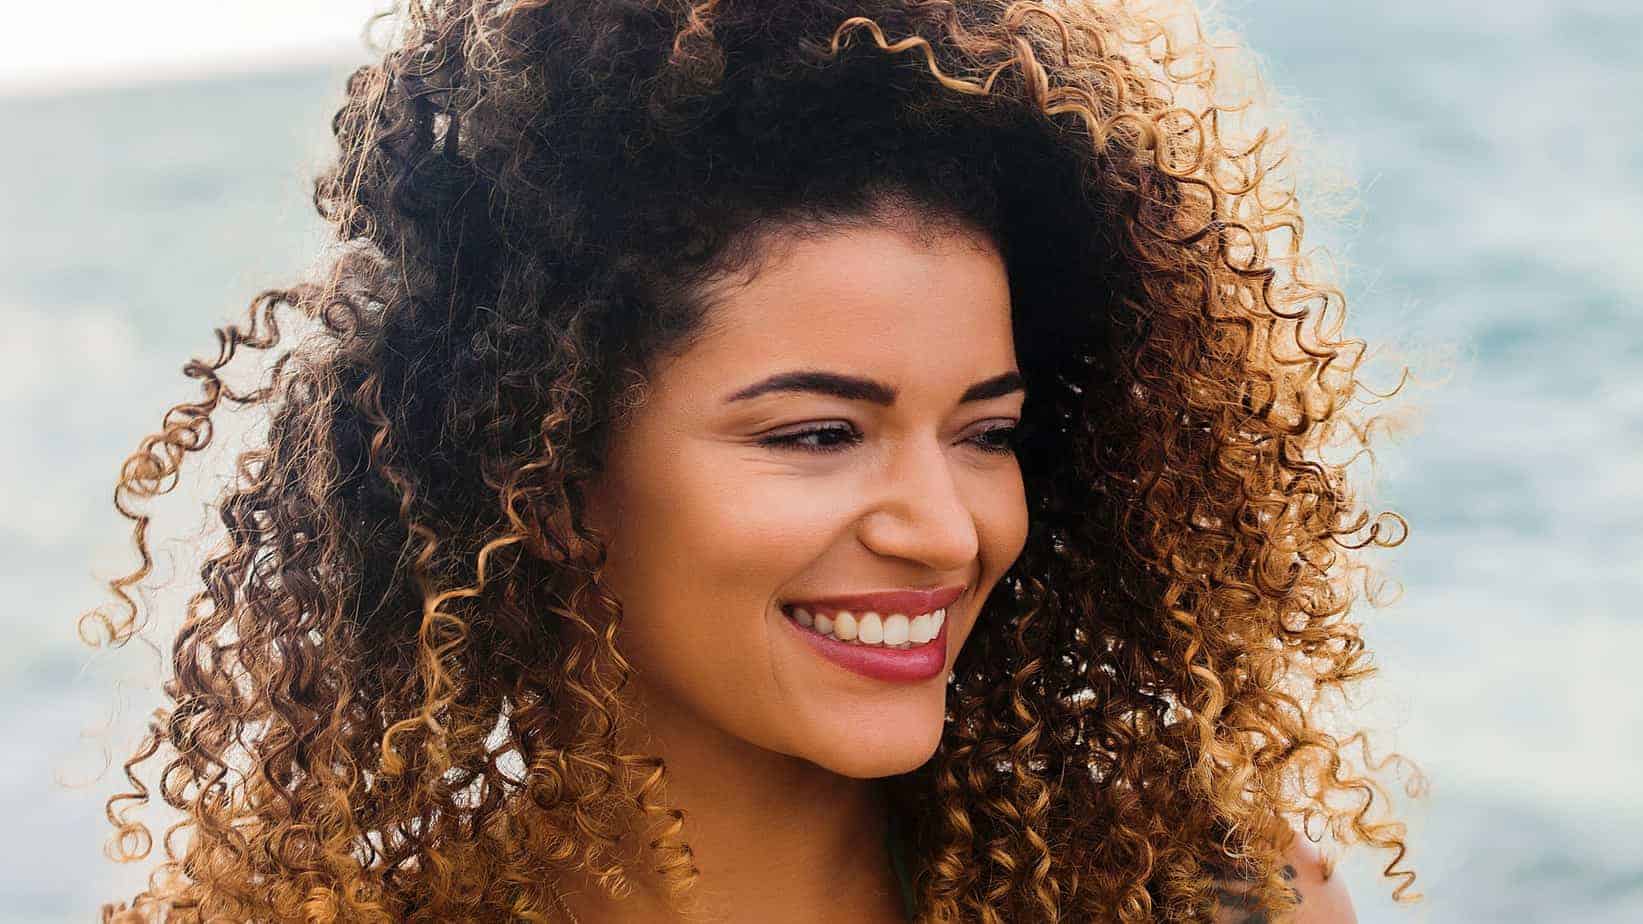 Cute Dominican women with curly dark hair roots and blonde tips smiling on the beach.